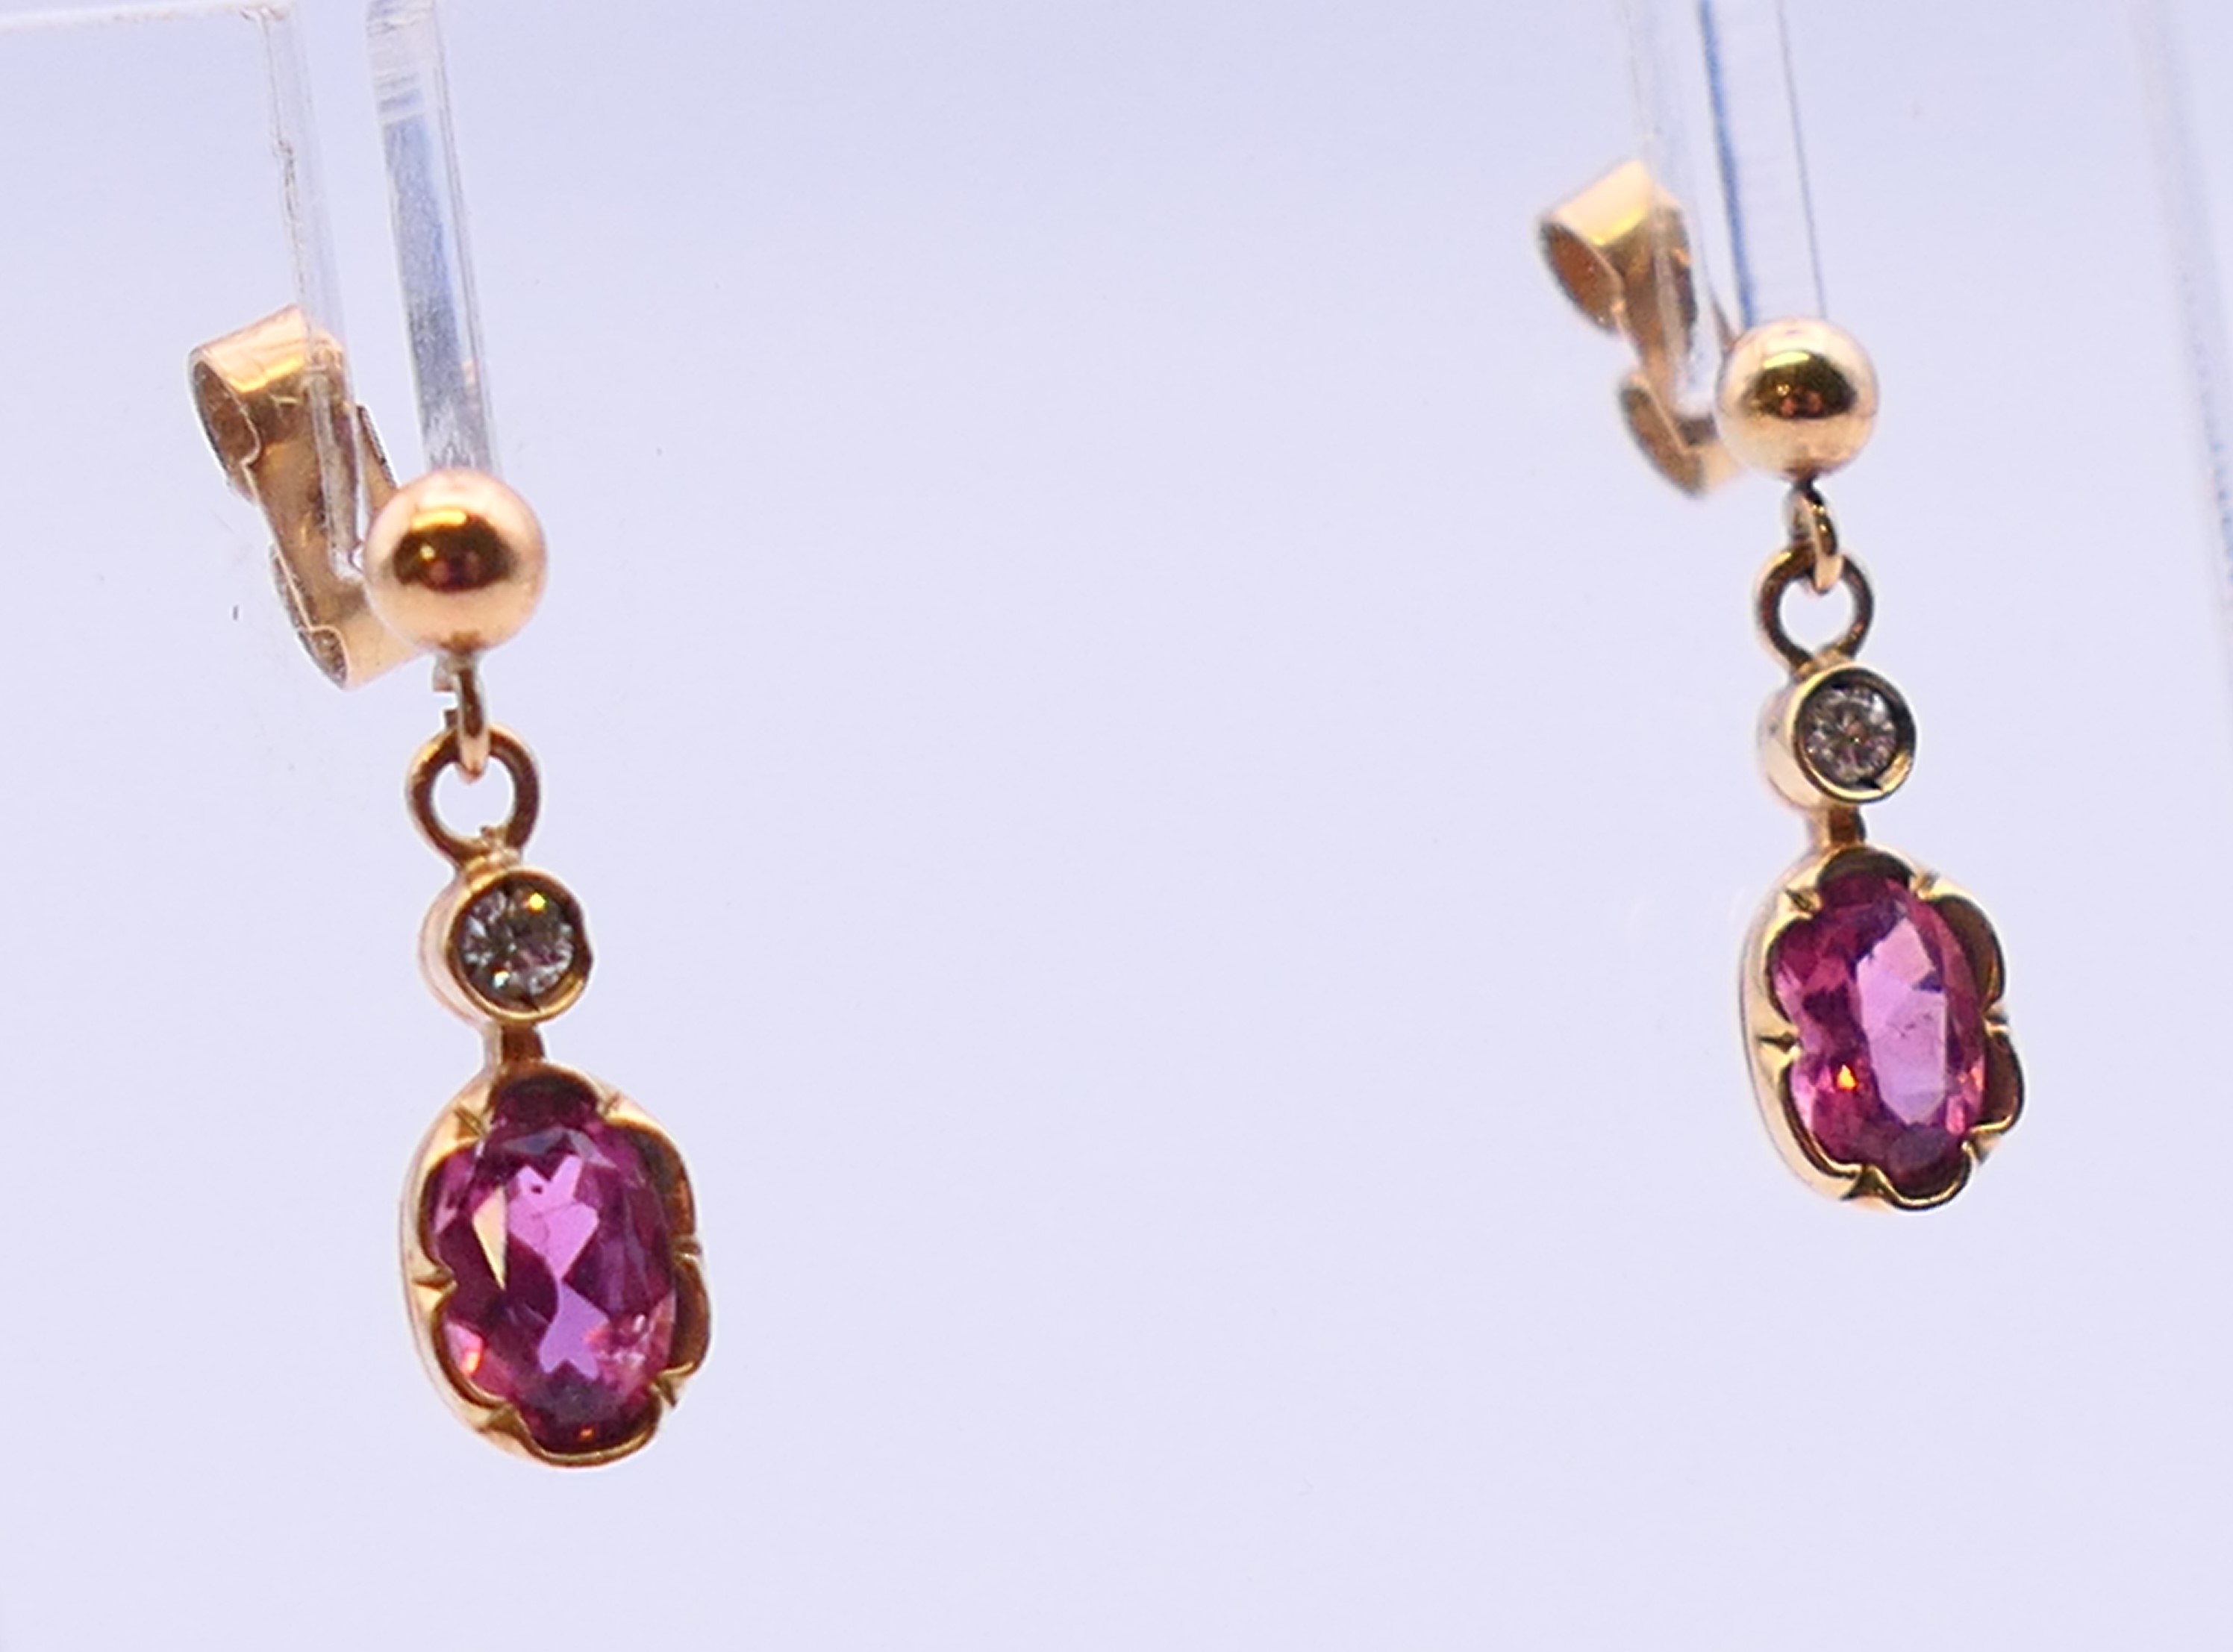 A pair of 9 ct gold oval pink gem earrings (believed to be tourmaline) with brilliant cut diamond. - Image 2 of 4